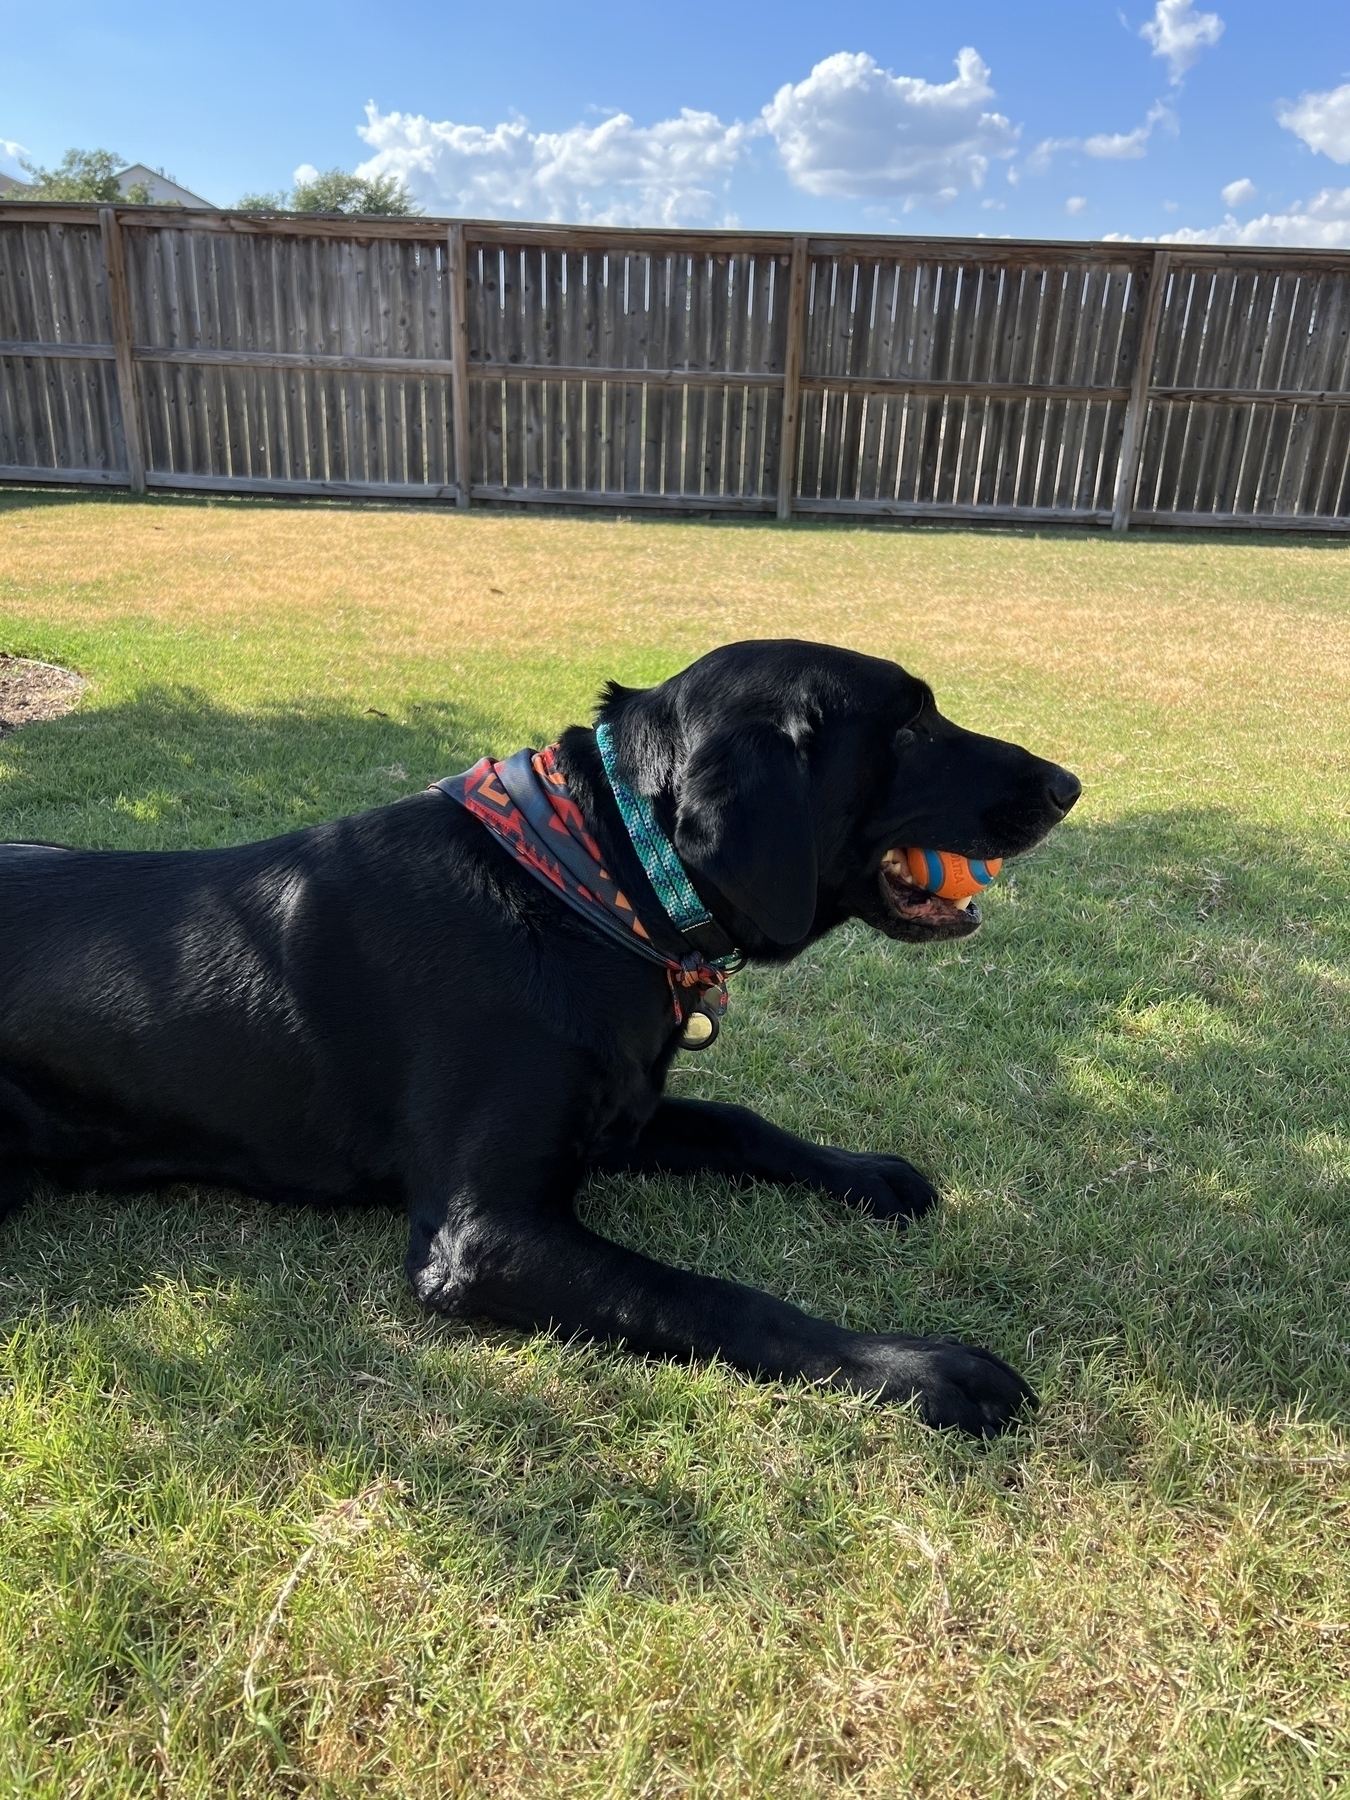 Black Labrador retriever laying in grass. Orange and blue ball in its mouth. Teal collar around neck. 